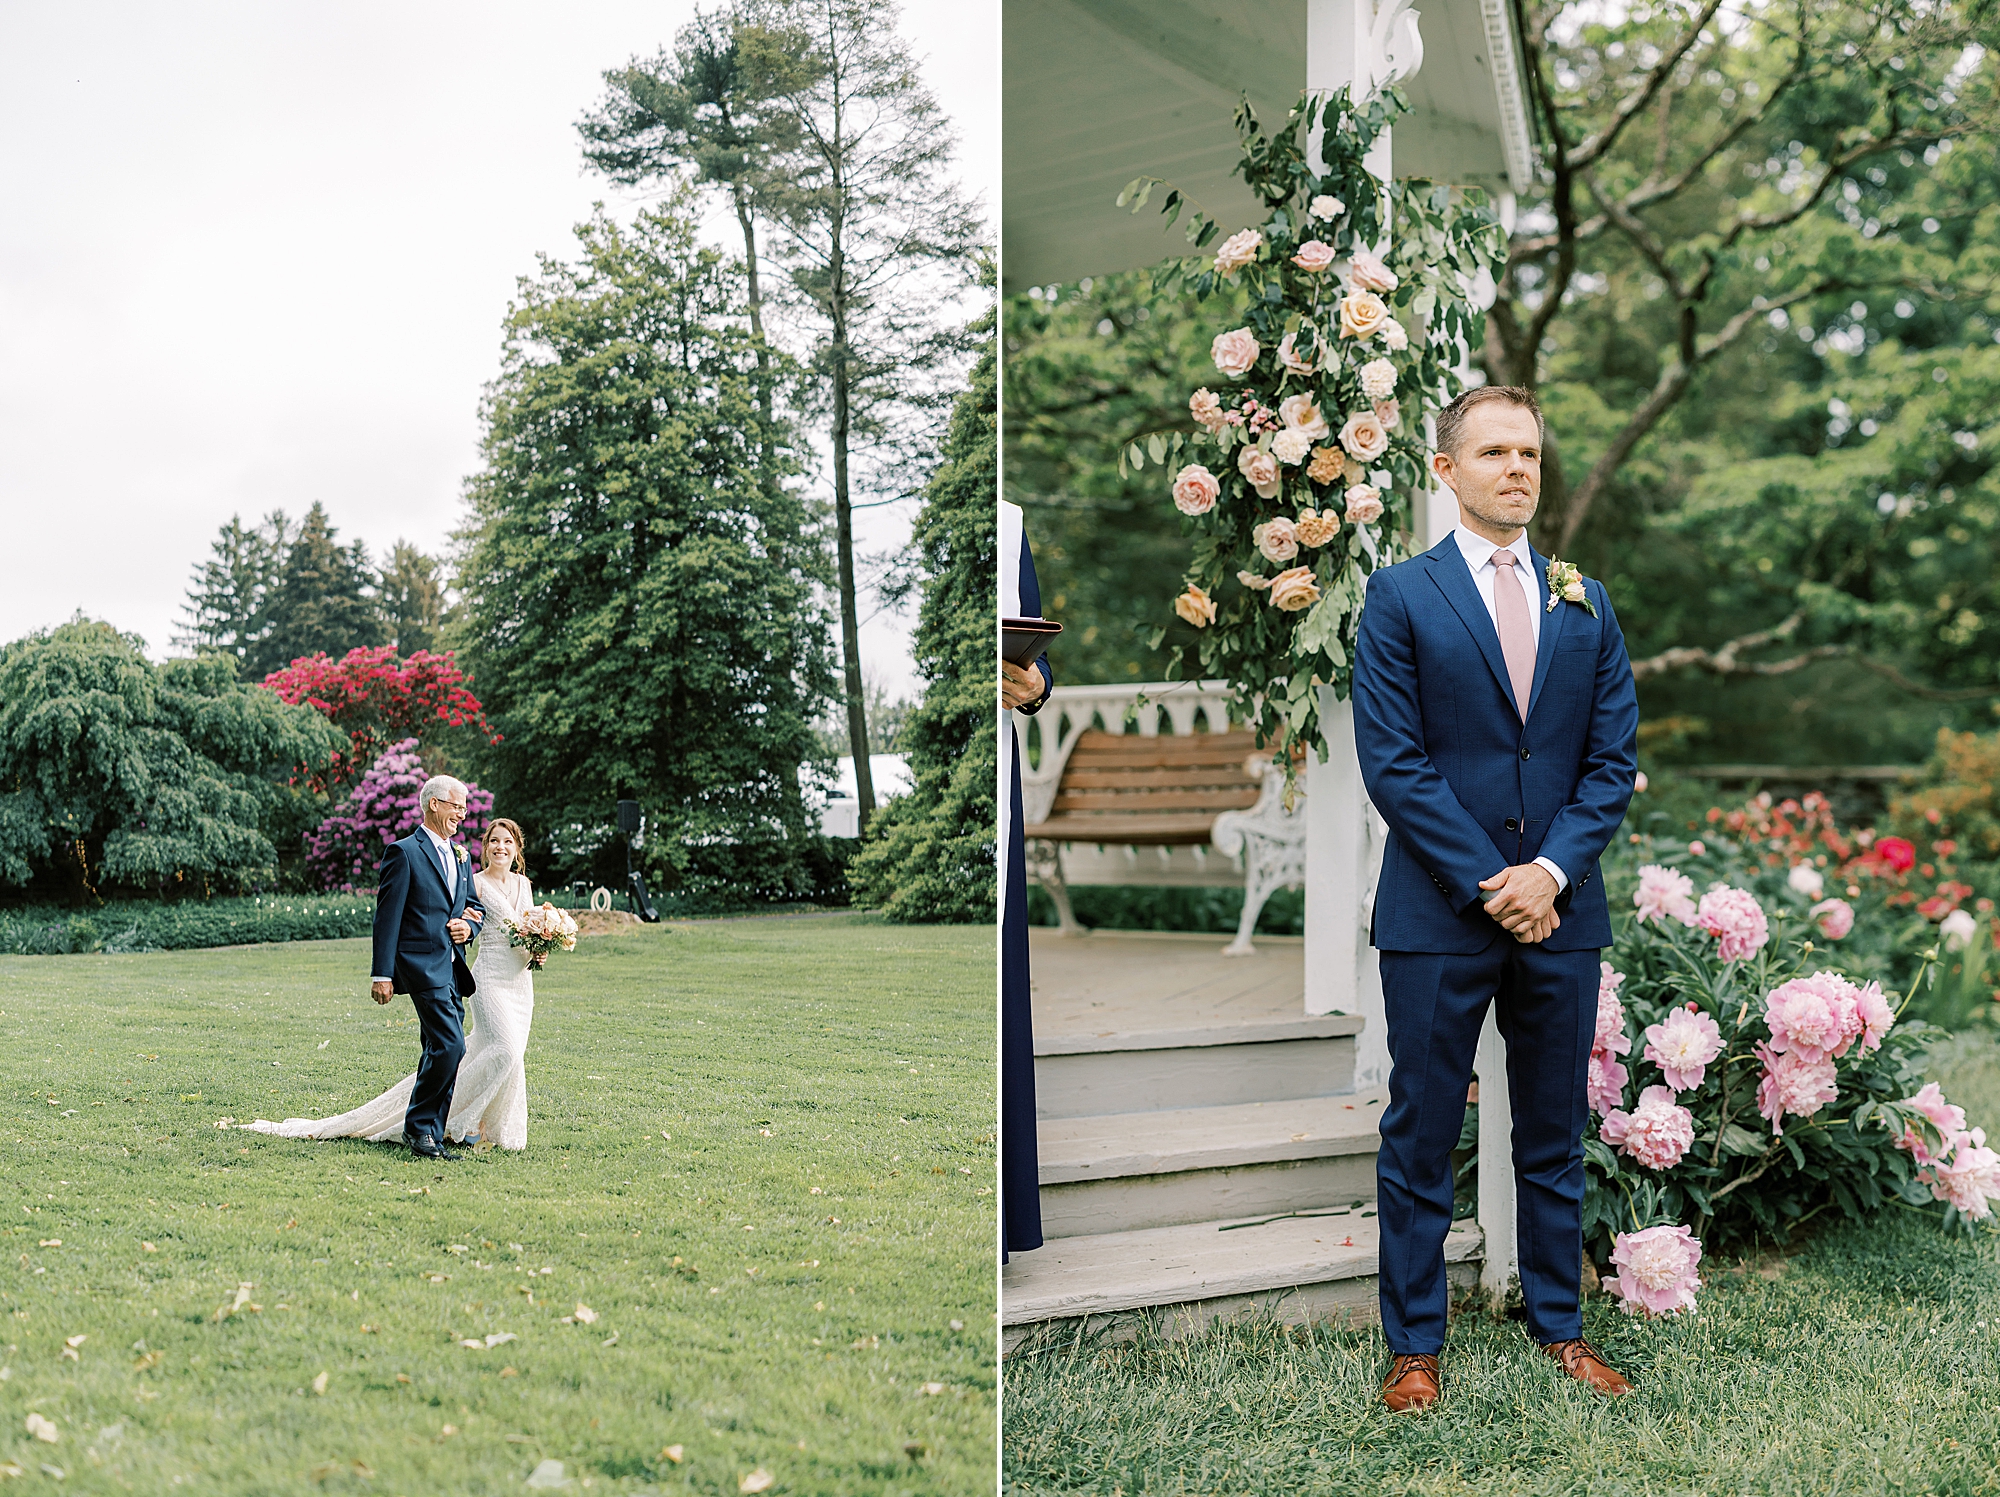 bride and father walk across lawn at Bellevue Hall to meet groom for ceremony in garden